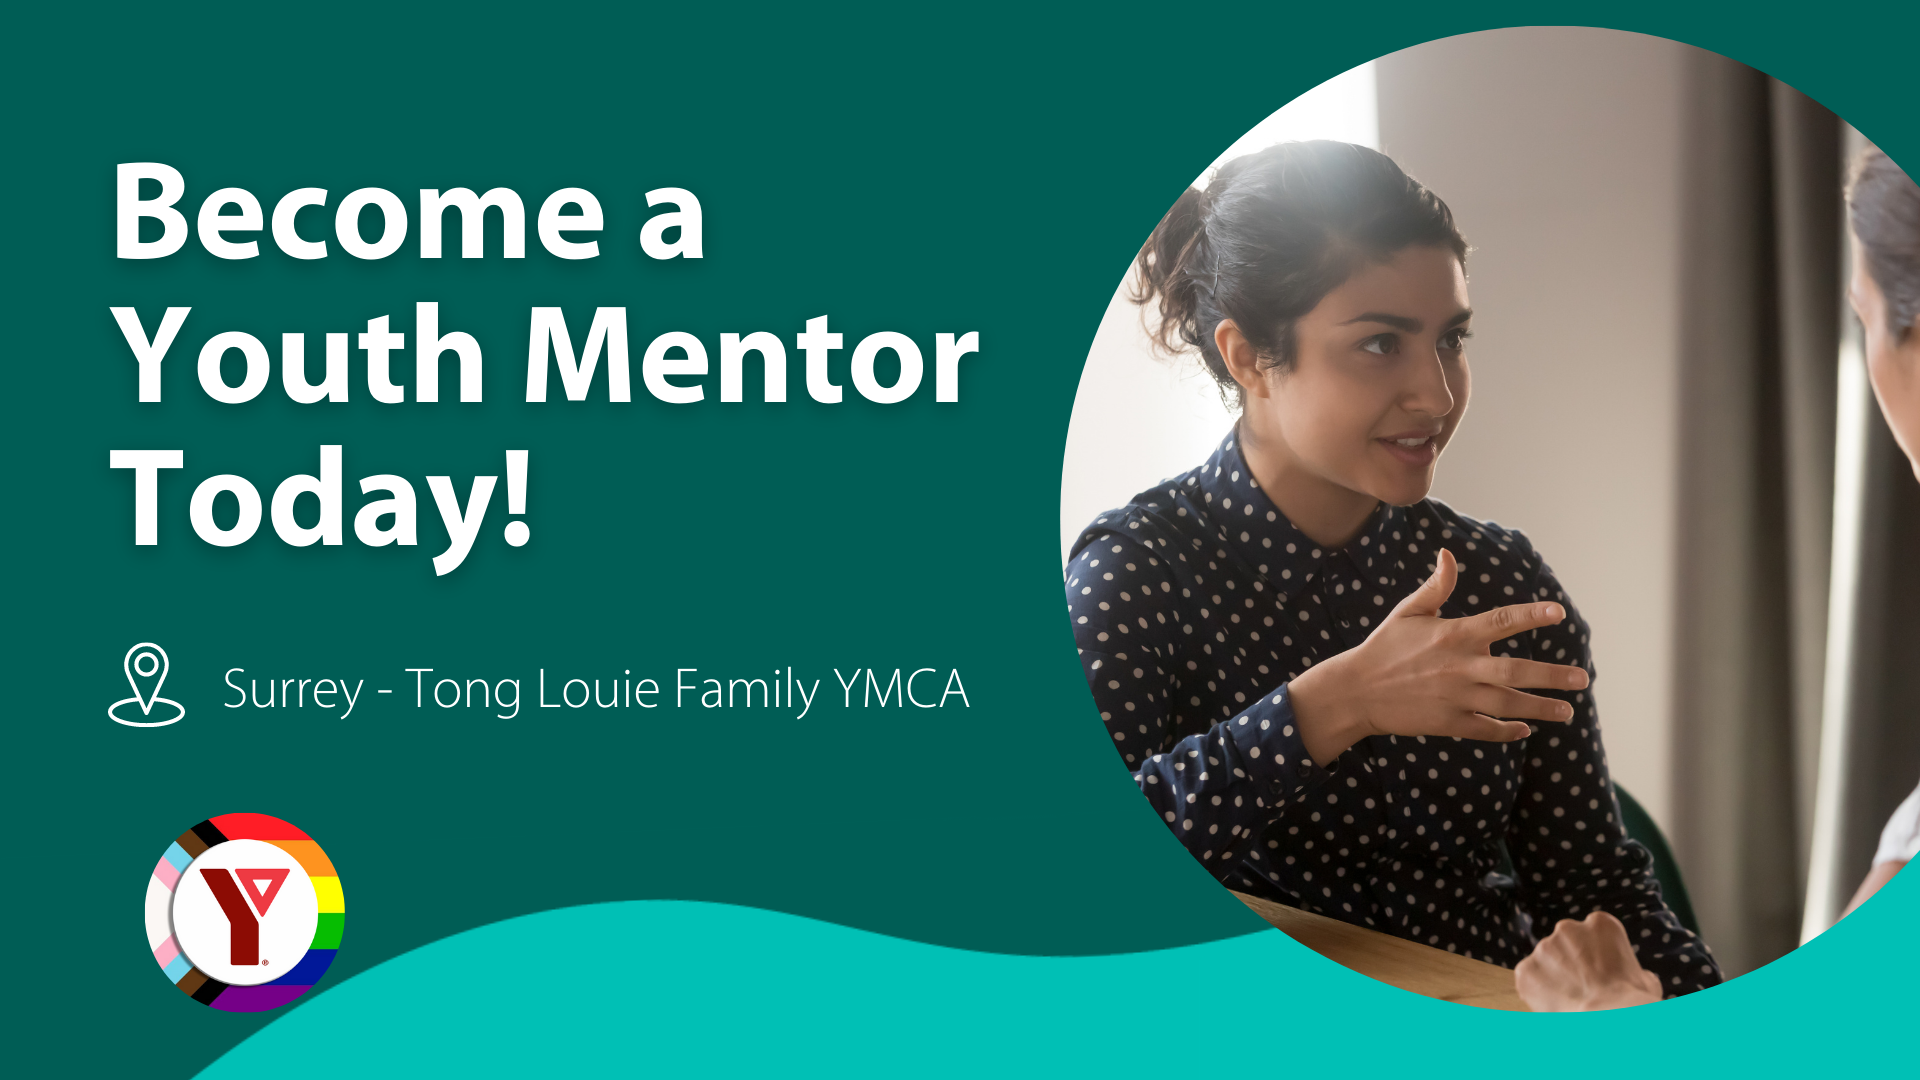 Two young women speak with each other in an image that features the YMCA logo and messaging that reads: "Become a Youth Mentor Today!"